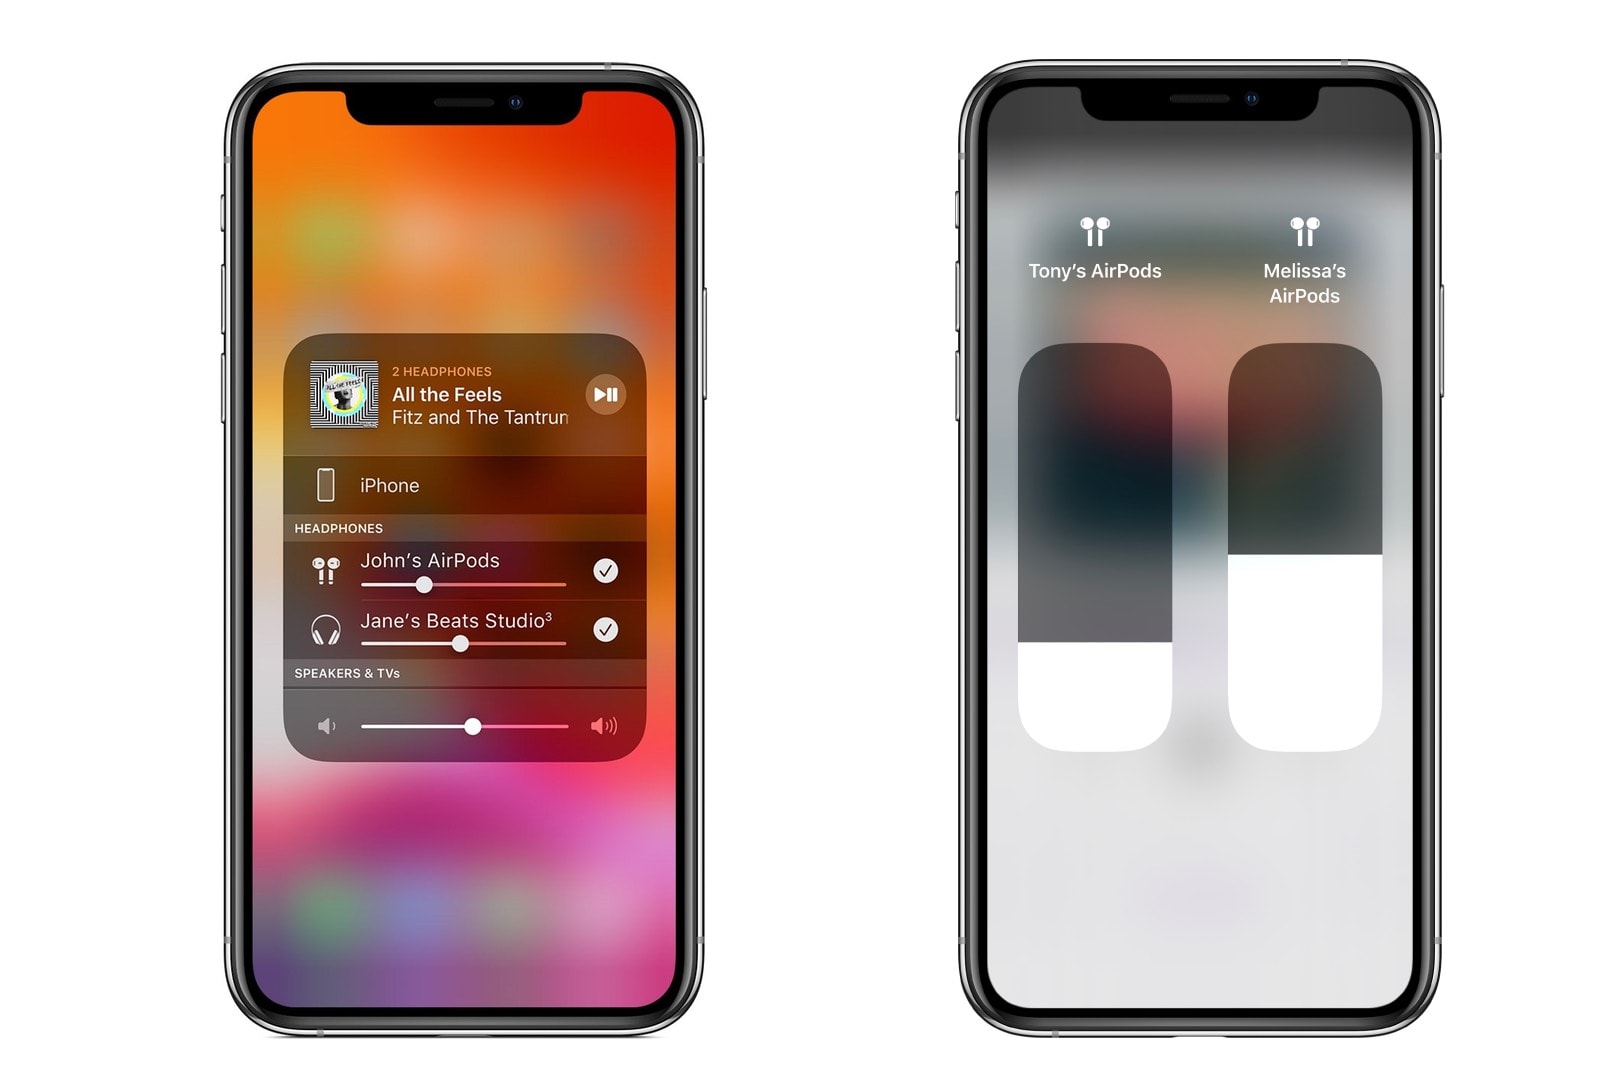 When sharing AirPods audio, you can control your levels separately.